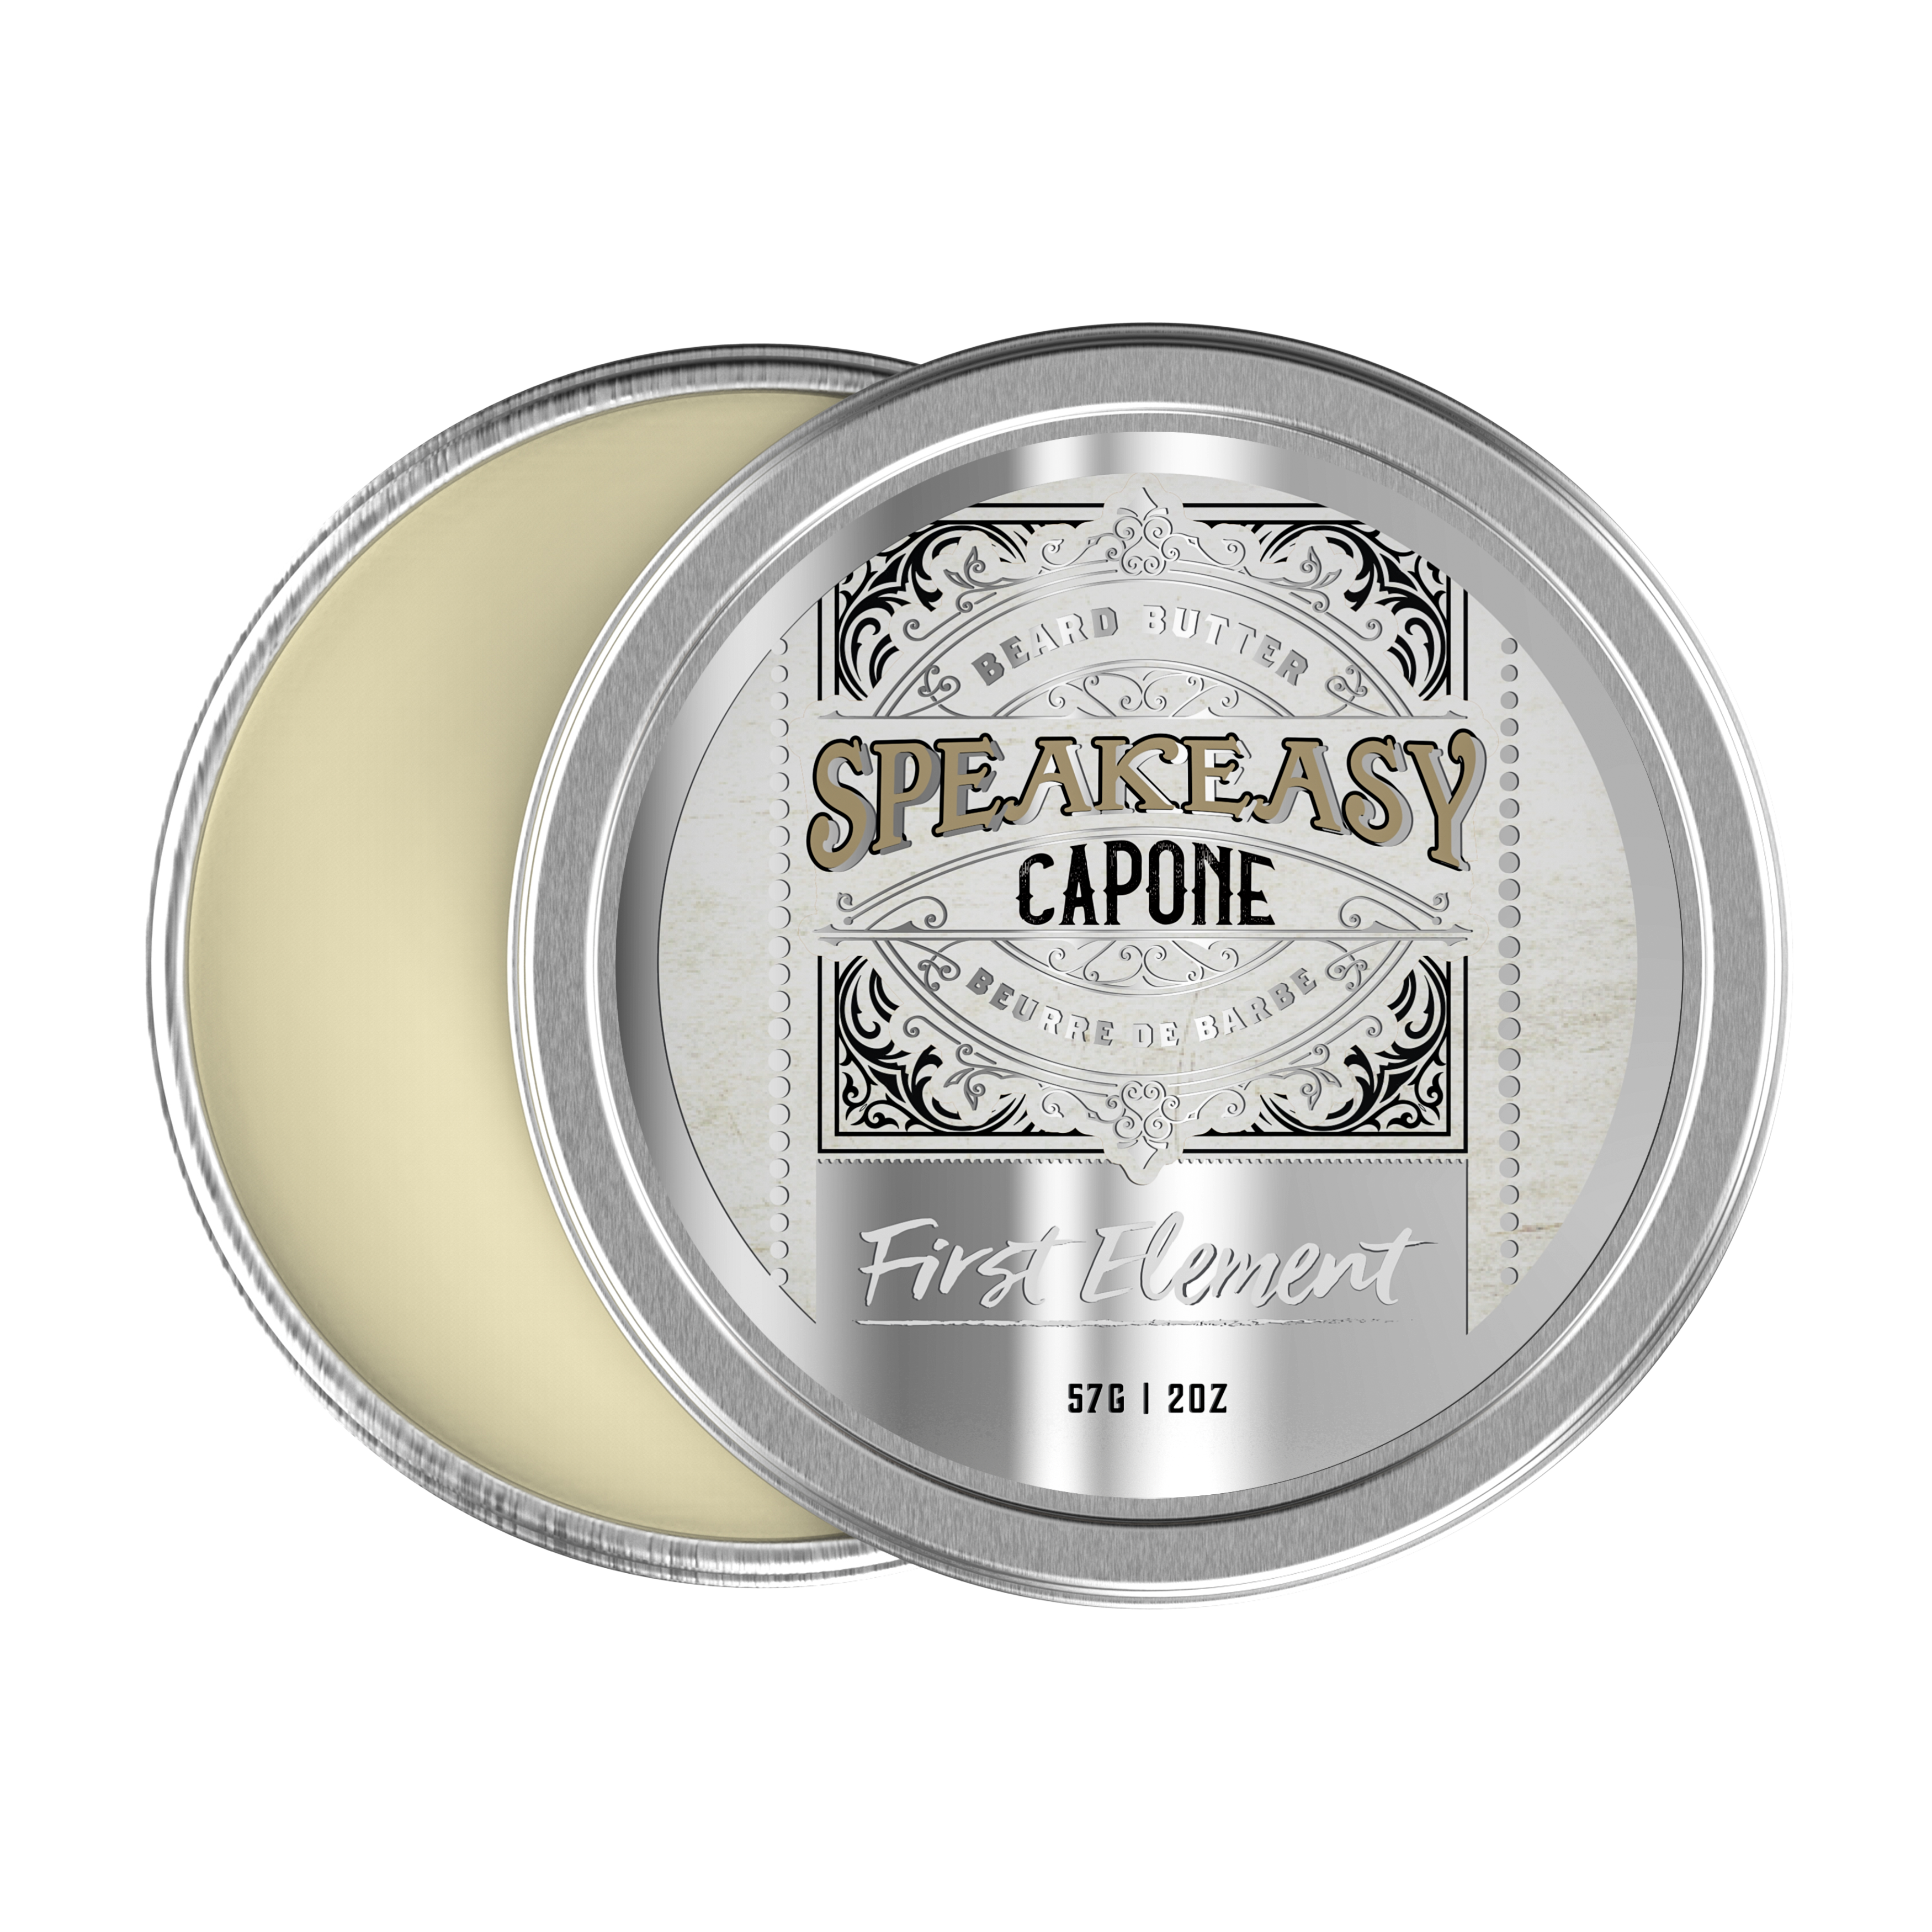 A 2-ounce metal tin with a screw-on top and a tamper-evident seal. The label reads 'Speakeasy Capone Beard Butter,' showcasing its Canadian-made, premium quality. The background features vintage-inspired typography, hinting at the old-school vibe of the product.